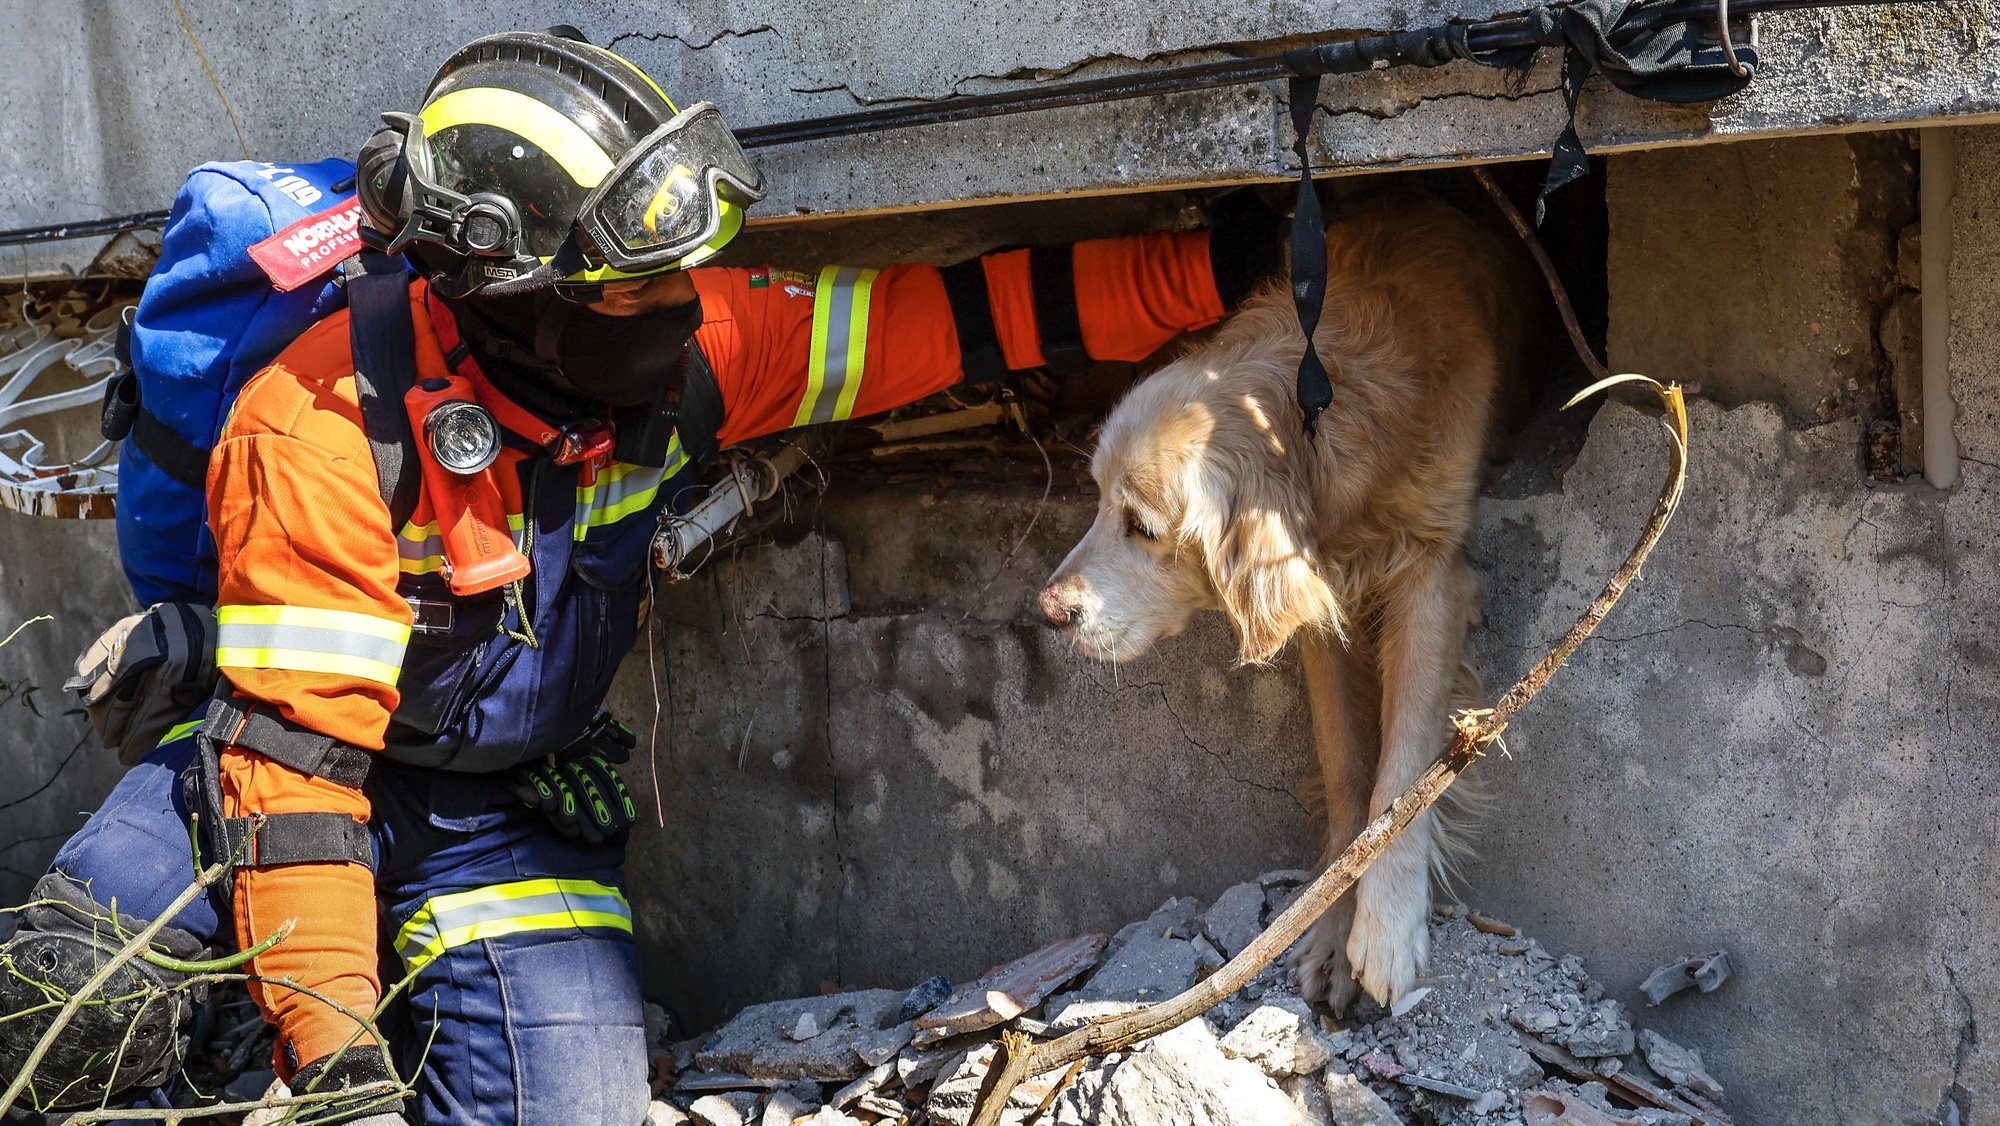 Portuguese rescue team members trying to free the dog named Tarcin ( Cinnamon) in a building that collapsed during the earthquake in Antakya capital of Hatay Province, the southernmost province of Turkey after the powerful earthquake, 14 February 2023. A team from Portugal of 53 Civil Protection, GNR, and emergency medical personnel left 08 February, for Turkey to support search and rescue efforts after 06 February earthquake, which has already killed more than 24,000 people in Turkey and Syria.  JOAO RELVAS/LUSA